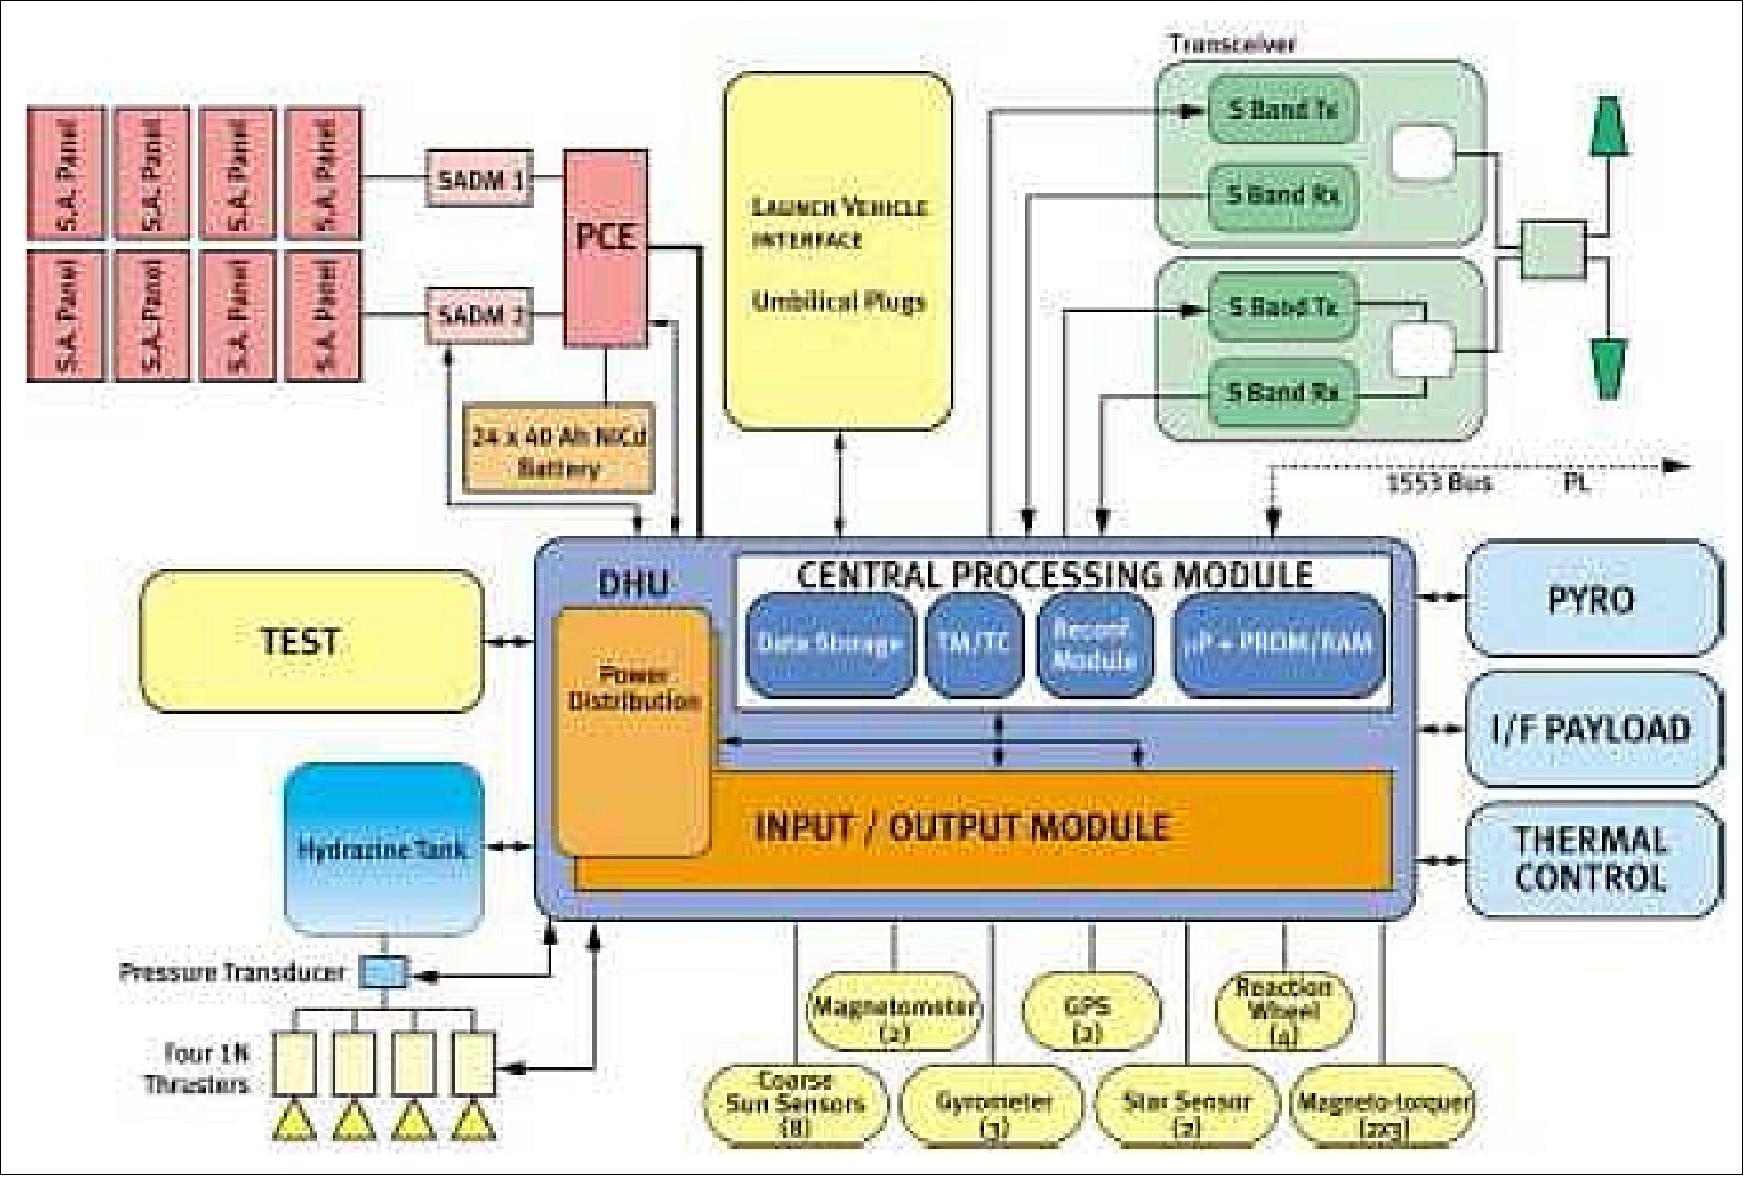 Figure 3: Schematic view of the command and control architecture (image credit: CNES)